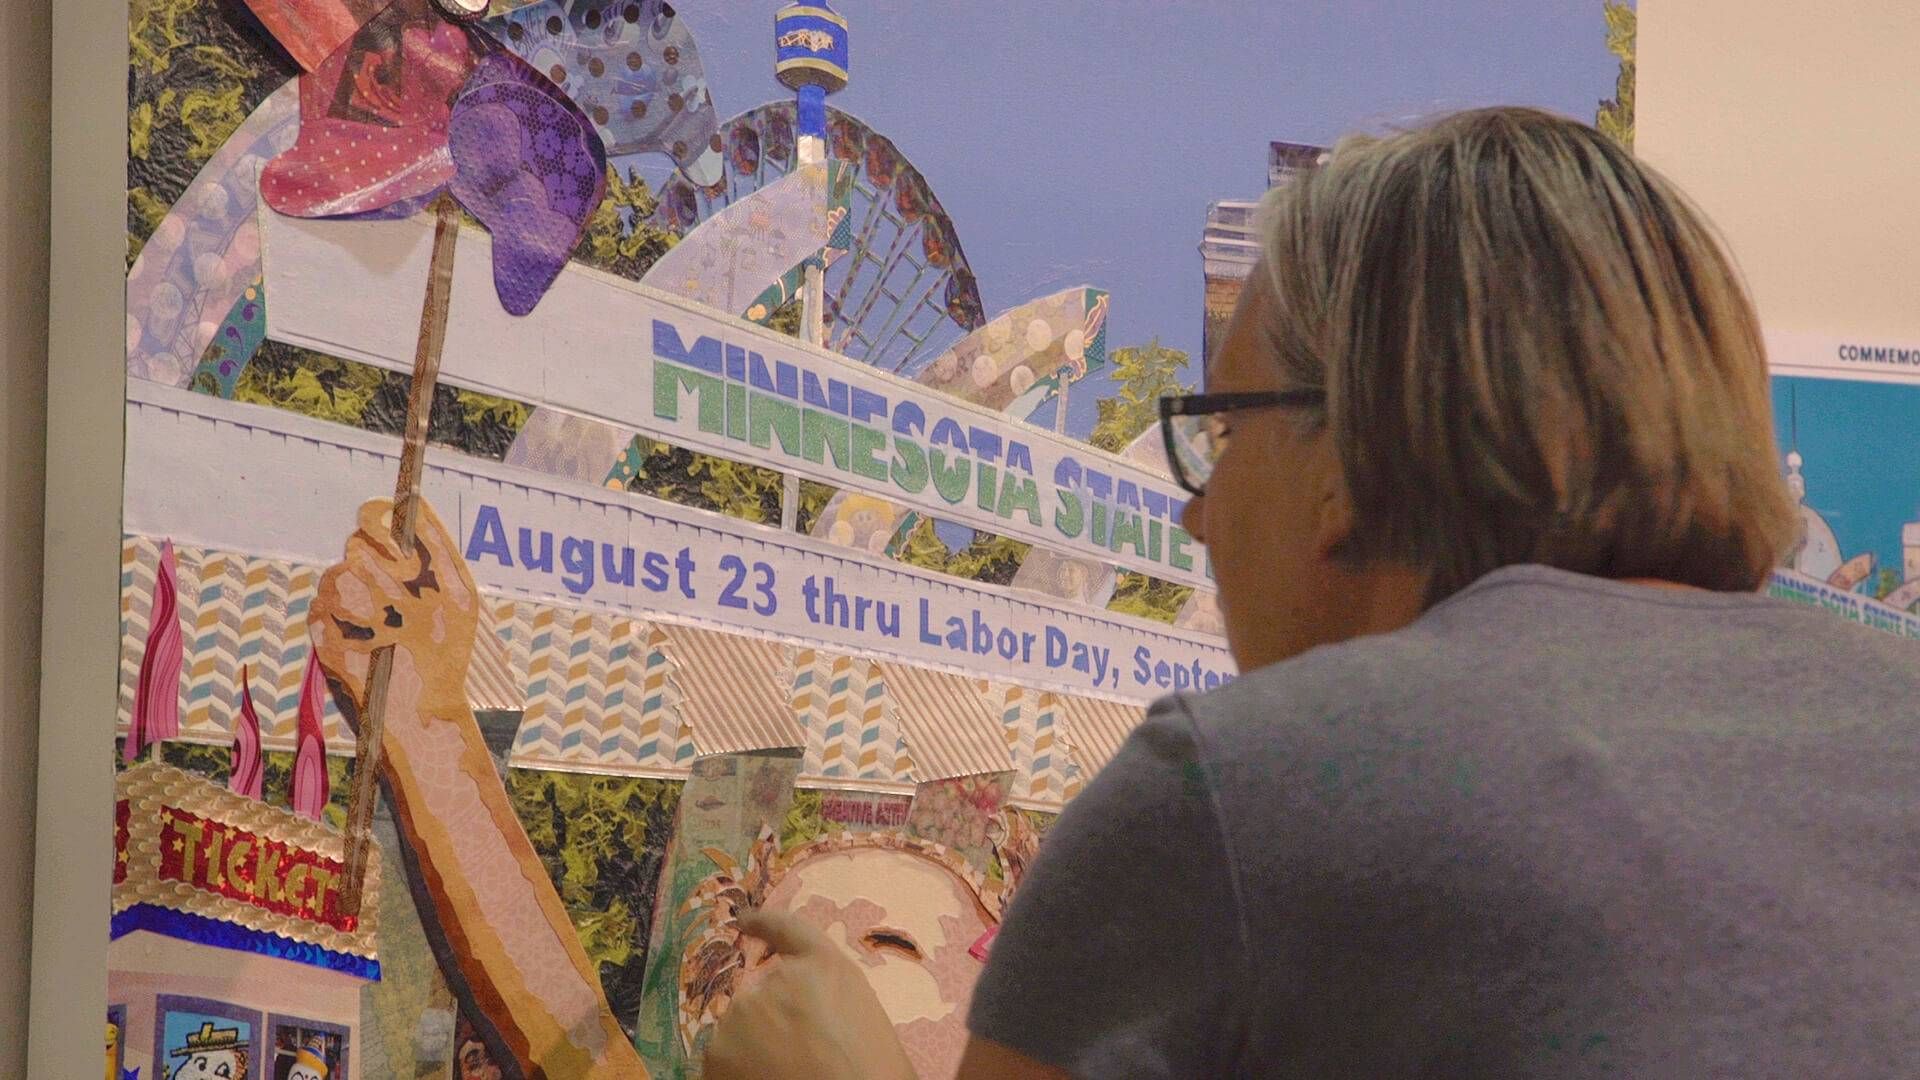 State Fair-Goer attempts to find all 50 hidden images of the State Fair in Kristi Abbott's 2018 Minnesota State Fair Commemorative Art.